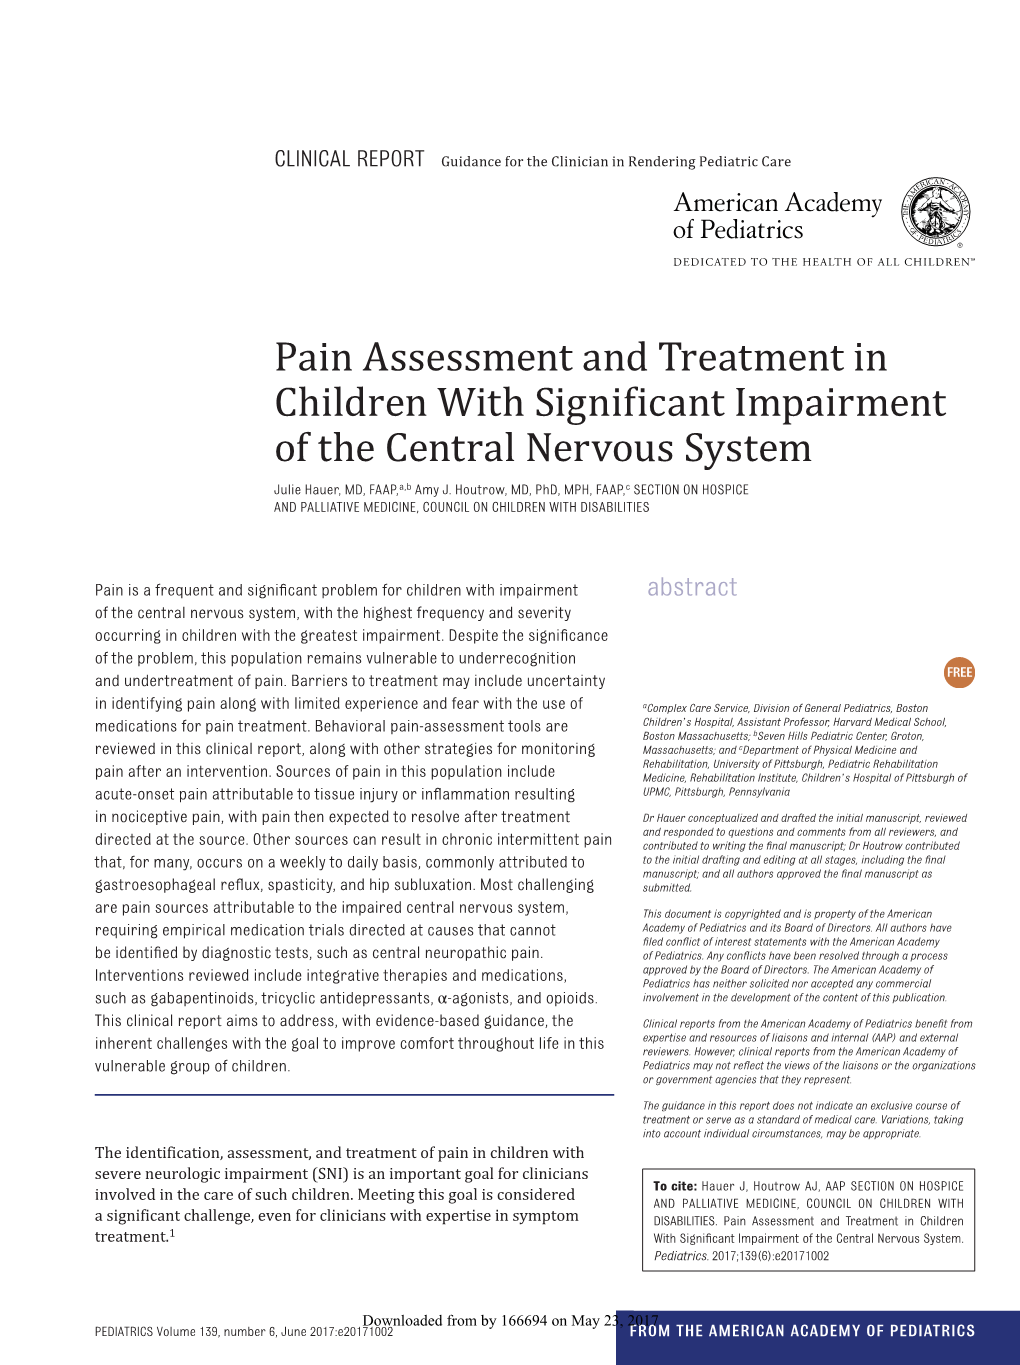 Pain Assessment and Treatment in Children with Significant Impairment of the Central Nervous System Julie Hauer, Amy J